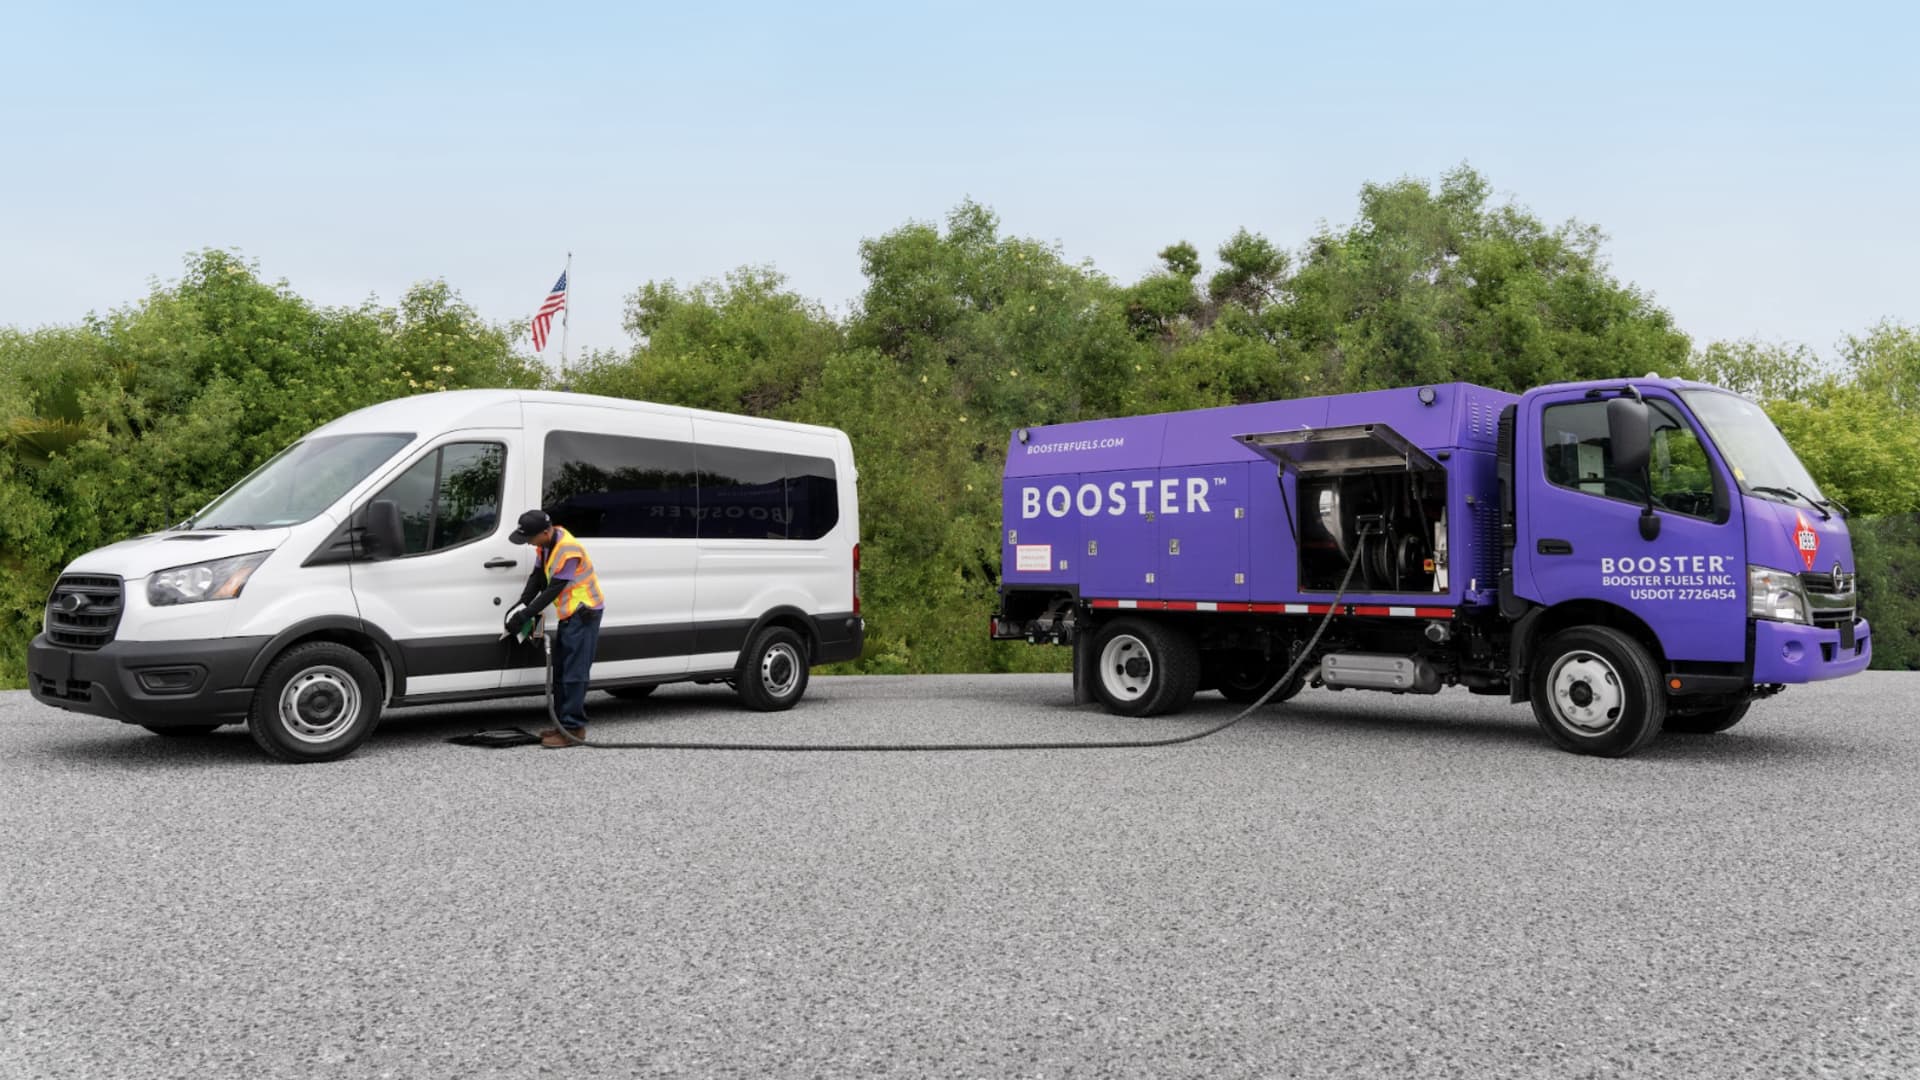 Booster is making renewable fuels accessible in ways a gas station cannot